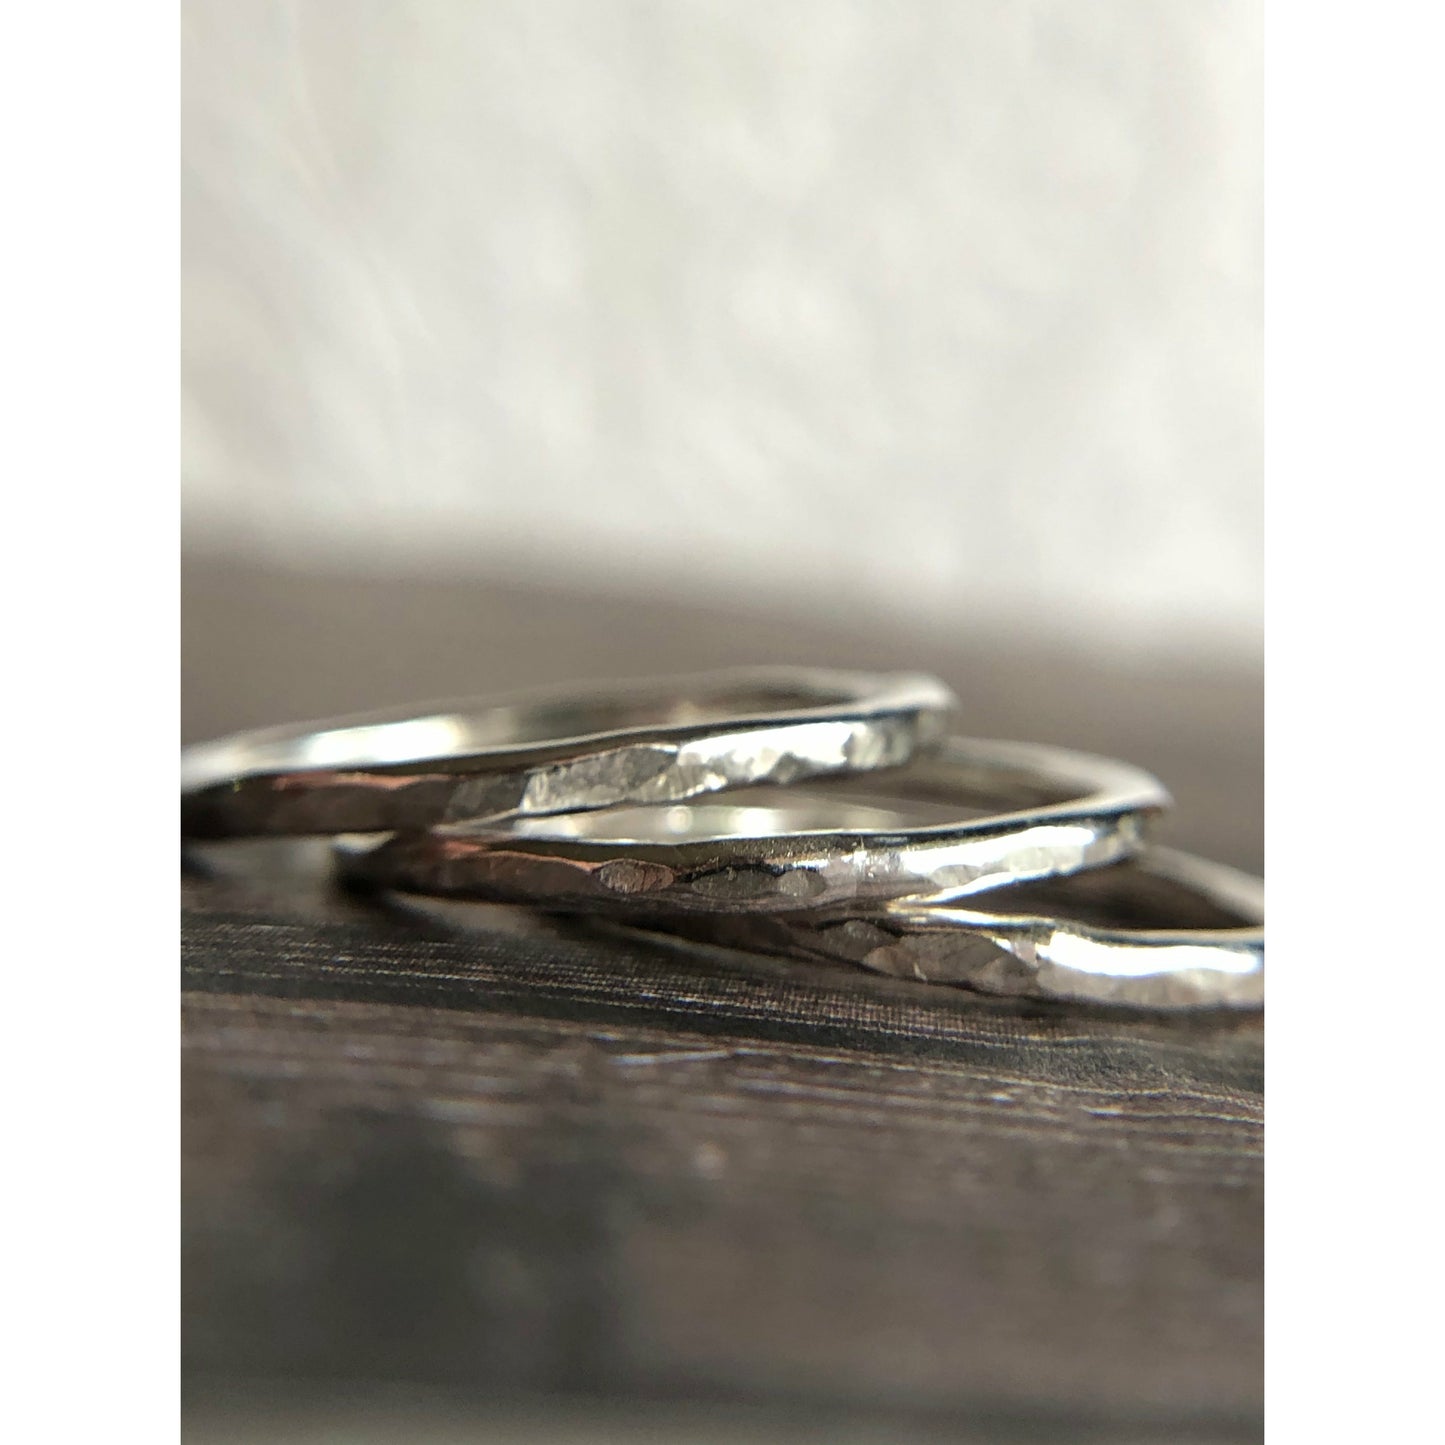 sterling-silver-rings-stackable-rings-hammered-bands-triple-band-ring-set-simple-band-thin-stack-silver-rings-gifts-for-her-graduation